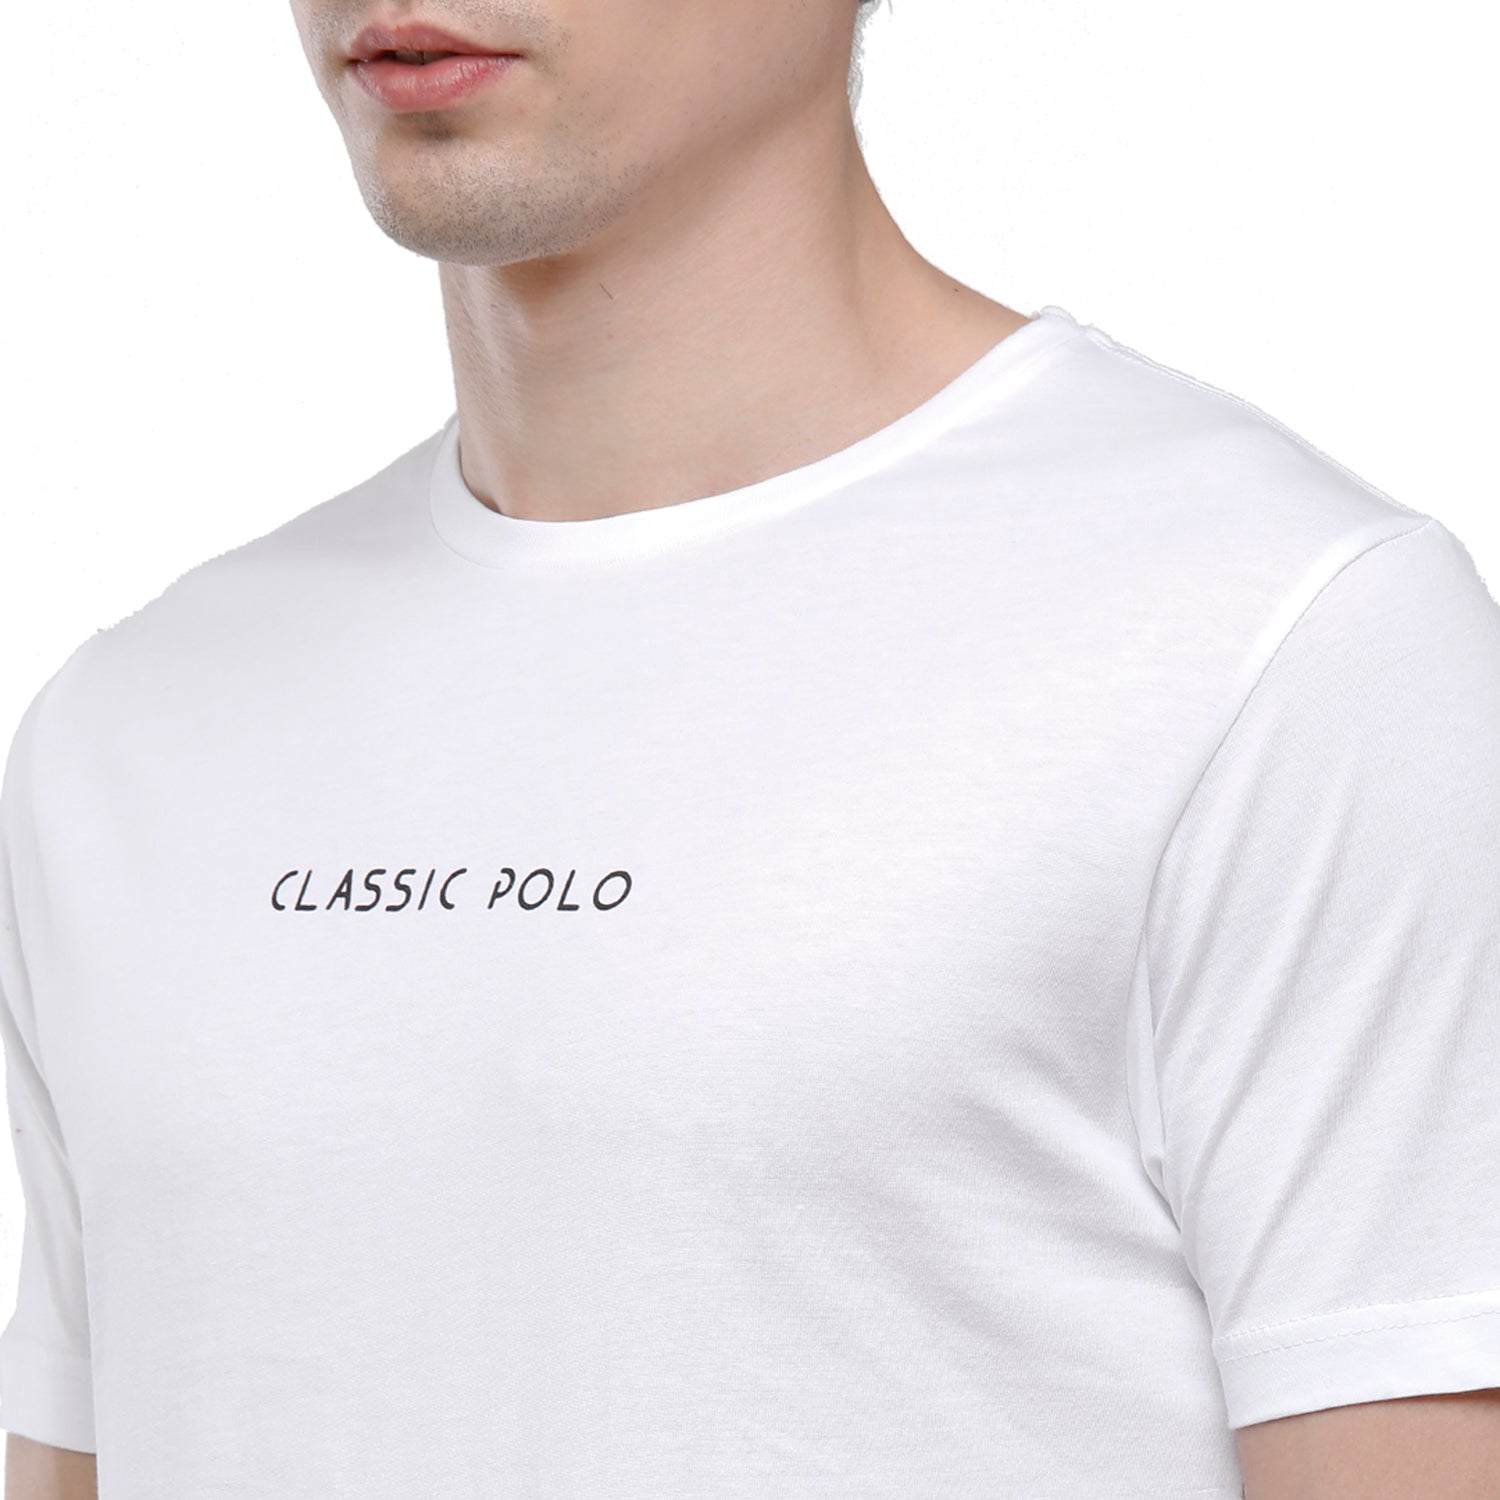 Classic Polo Mens 100% Cotton Solid Half Sleeve Round Neck T-Shirt - White (NOS-CERES-01 SF C) T-shirt Classic Polo 